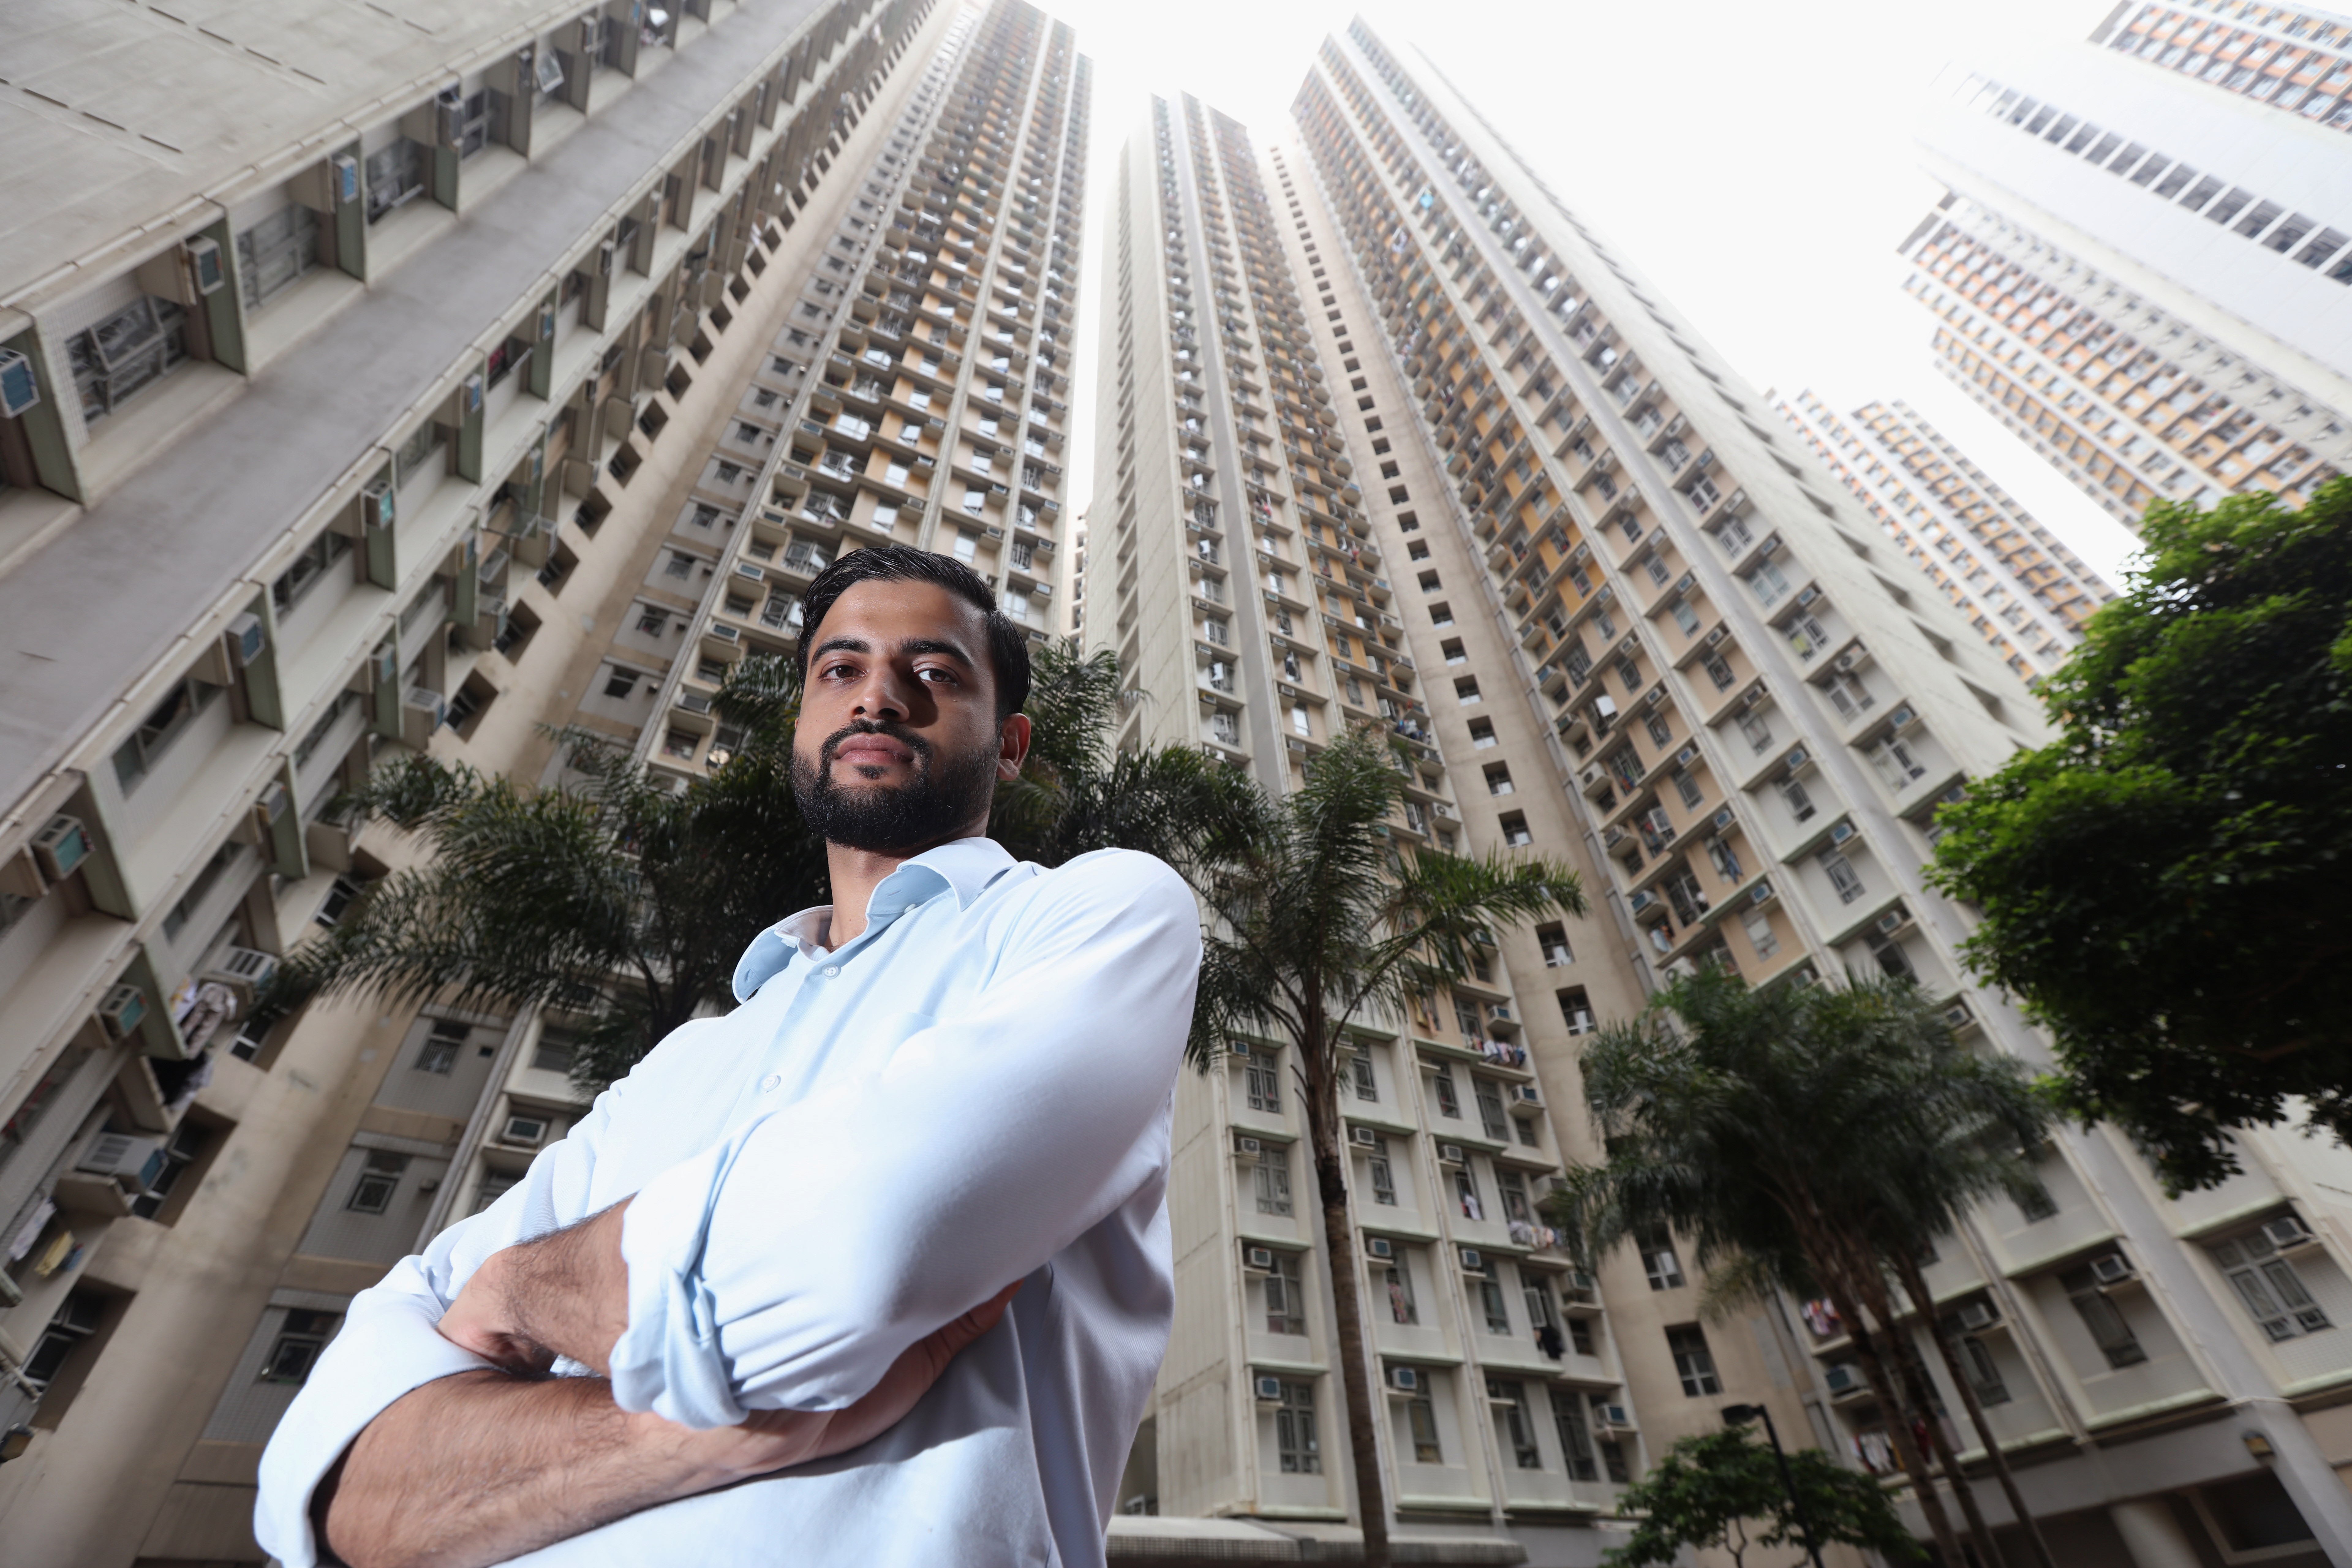 Yasir Naveed, an environmental consultant from Pakistan, says he regularly encounters racism in Hong Kong, particularly from taxi drivers. Photo: Felix Wong